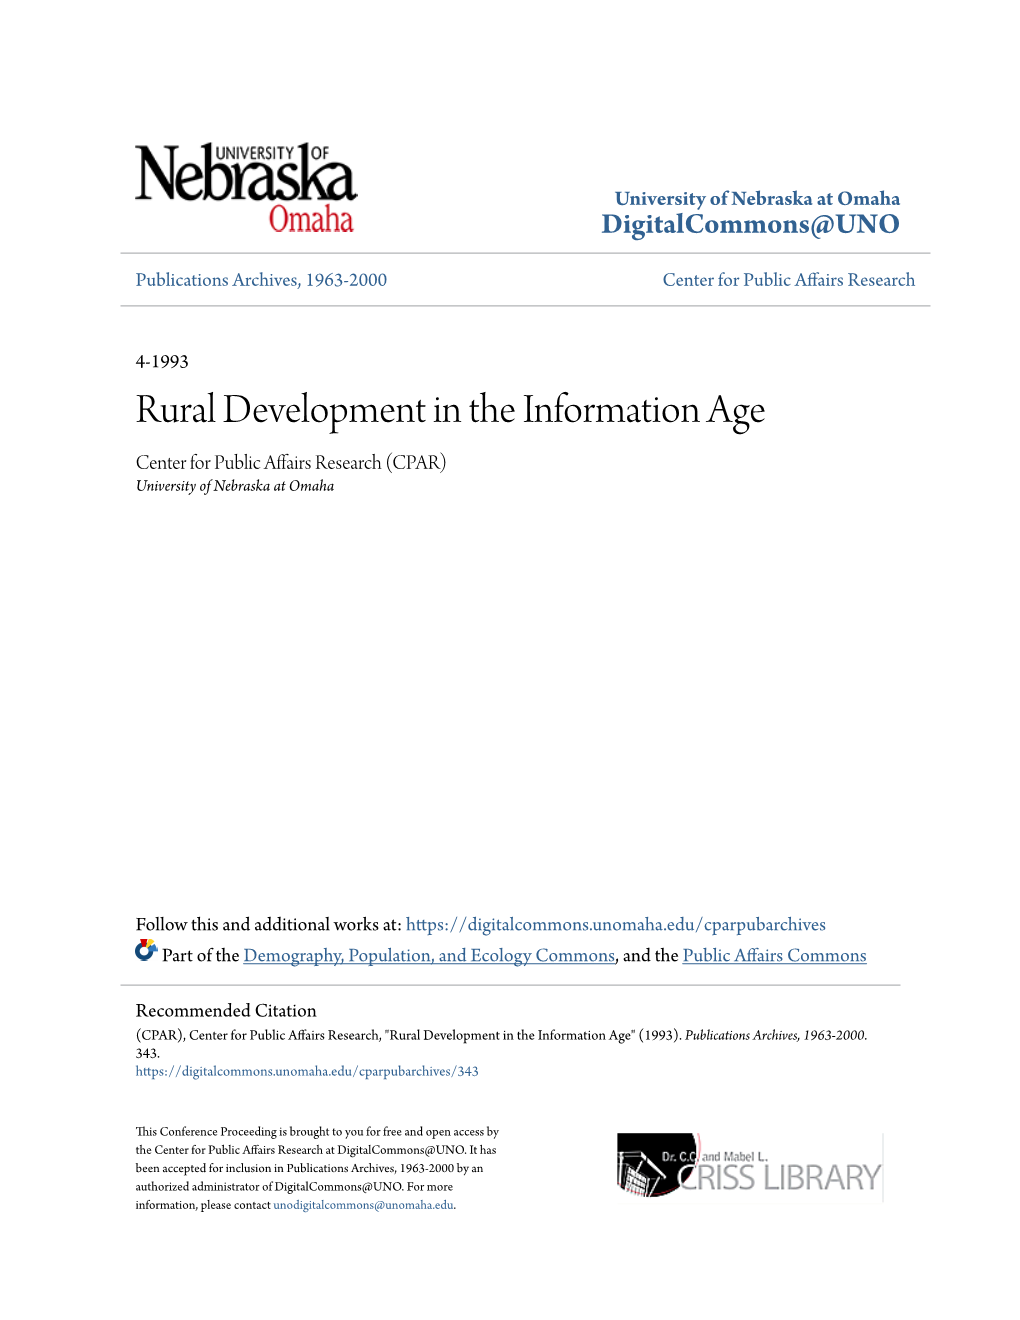 Rural Development in the Information Age Center for Public Affairs Research (CPAR) University of Nebraska at Omaha